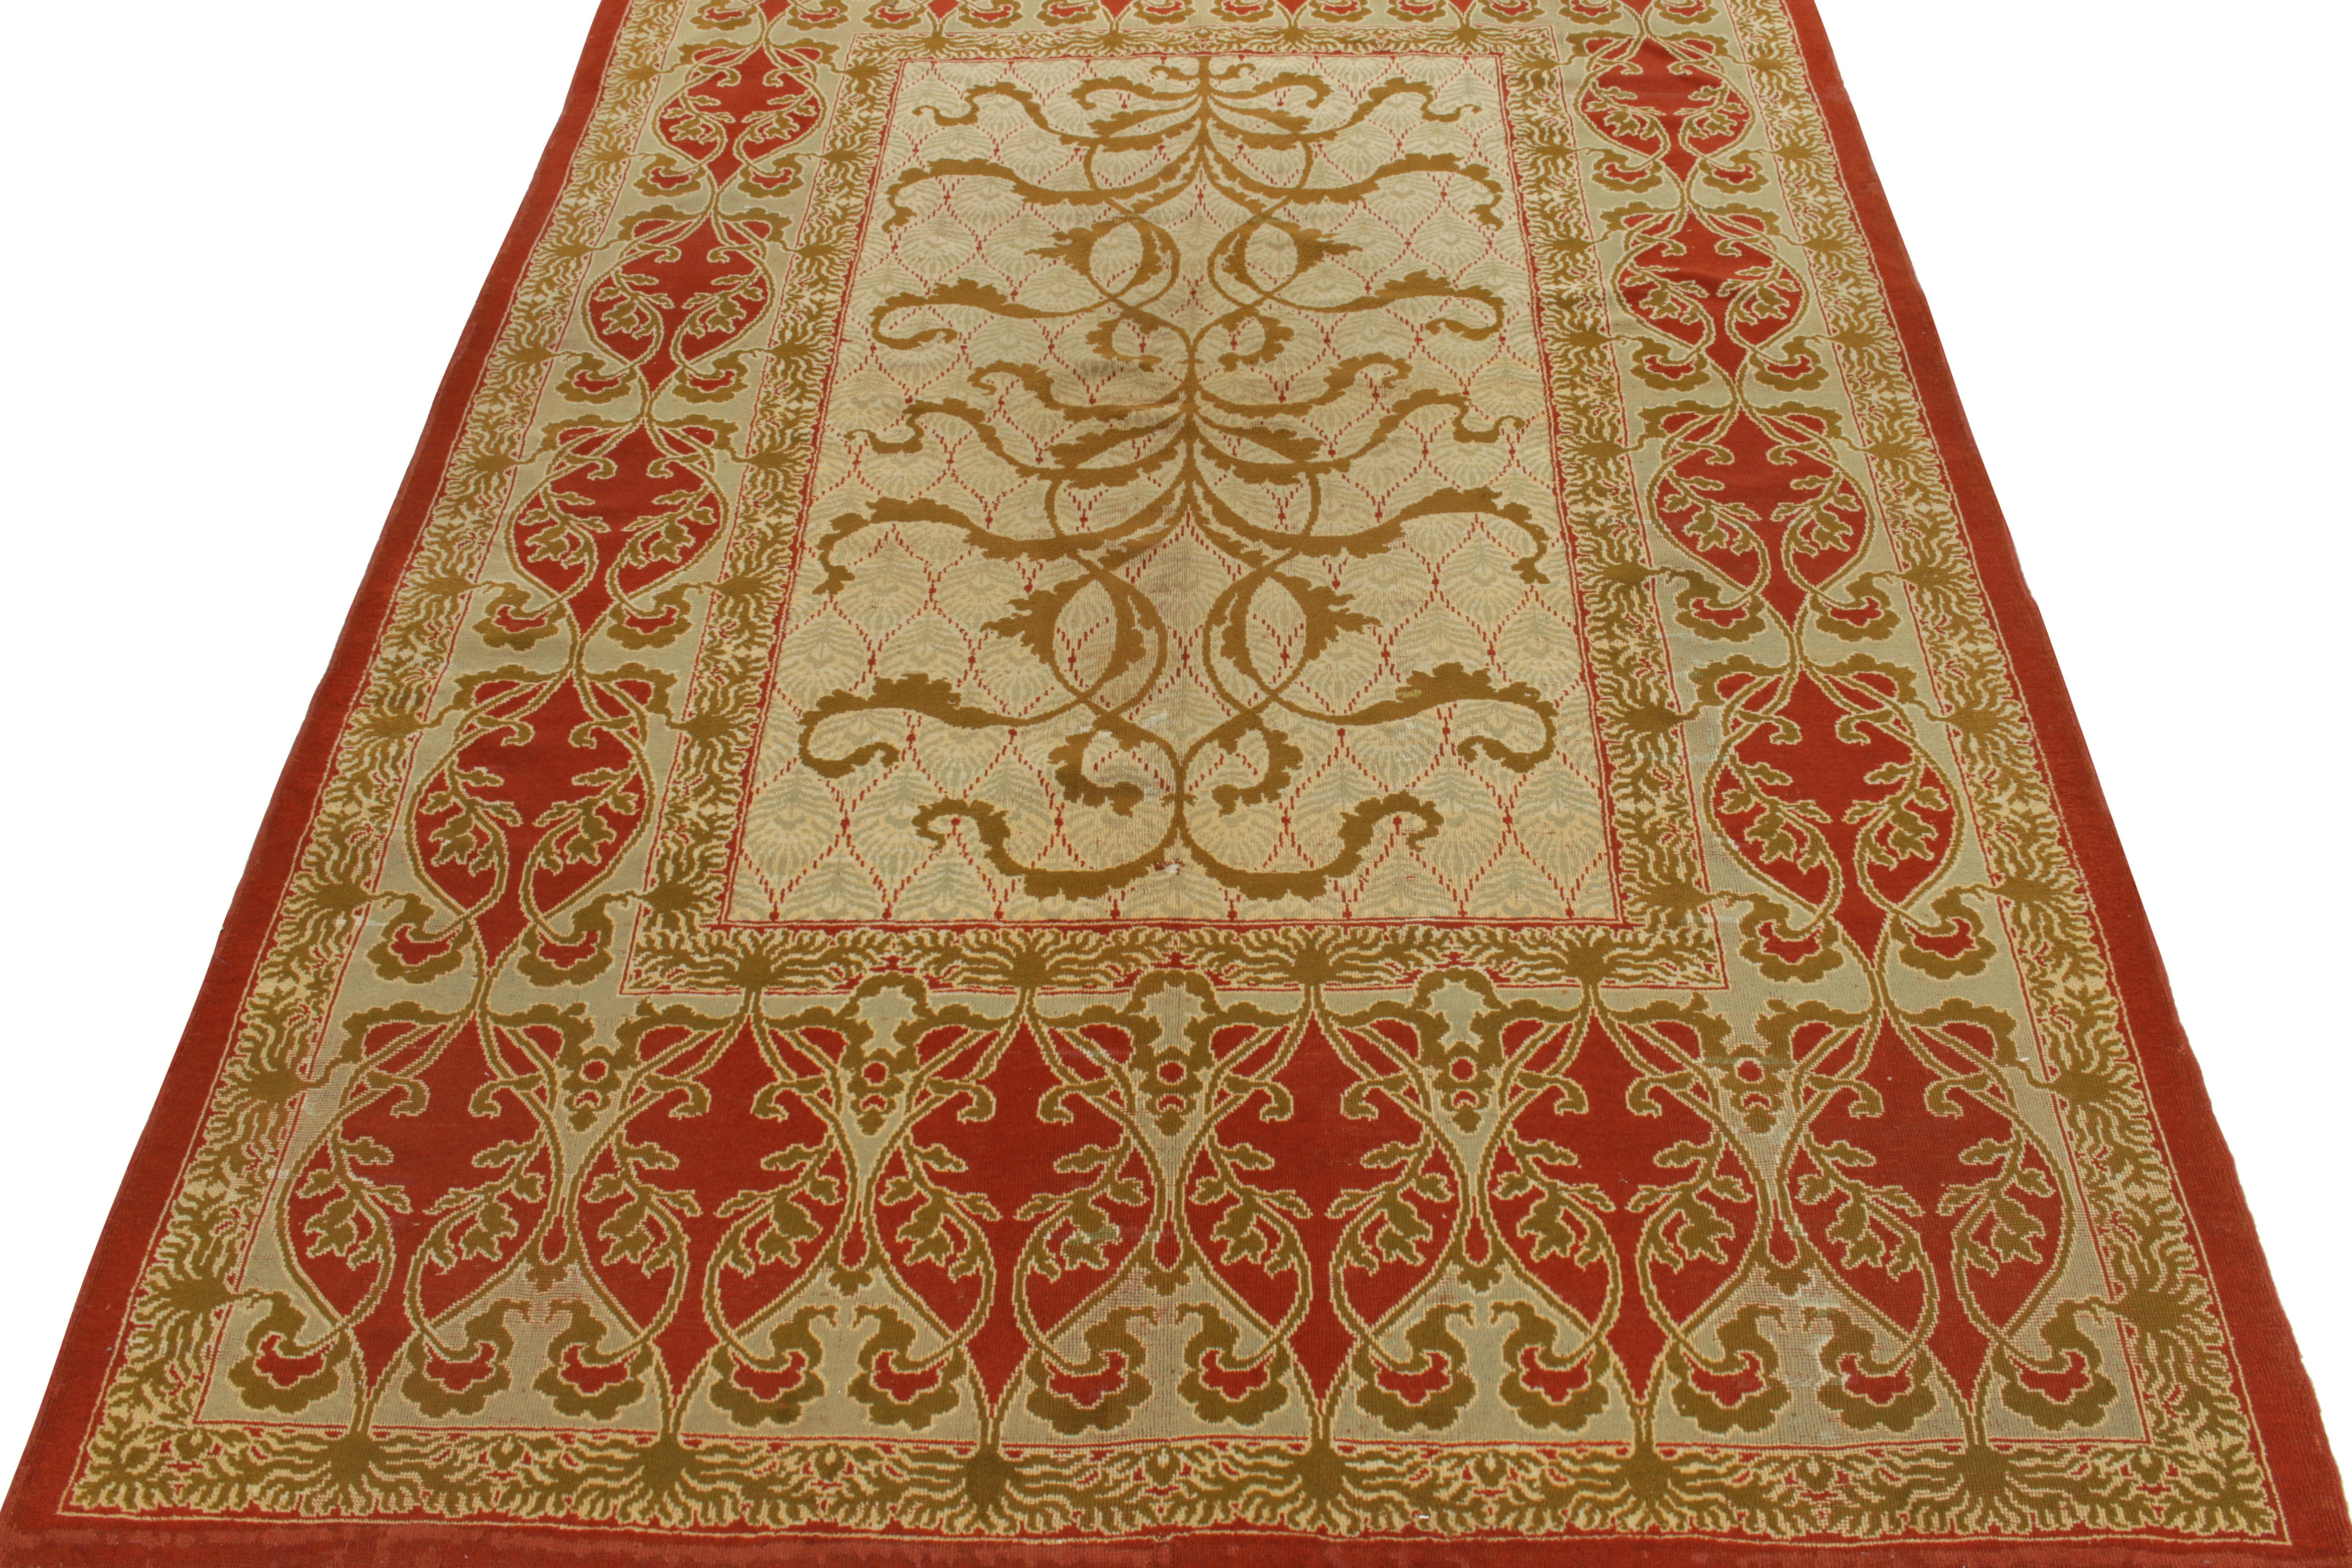 Hand-knotted in wool circa 1920-1930, Rug & Kilim boasts this 7x11 antique European Art Nouveau rug making a grand entry to their coveted Antique & Vintage collection. The rug embraces transitional aesthetics of the 1920s—most likely originating